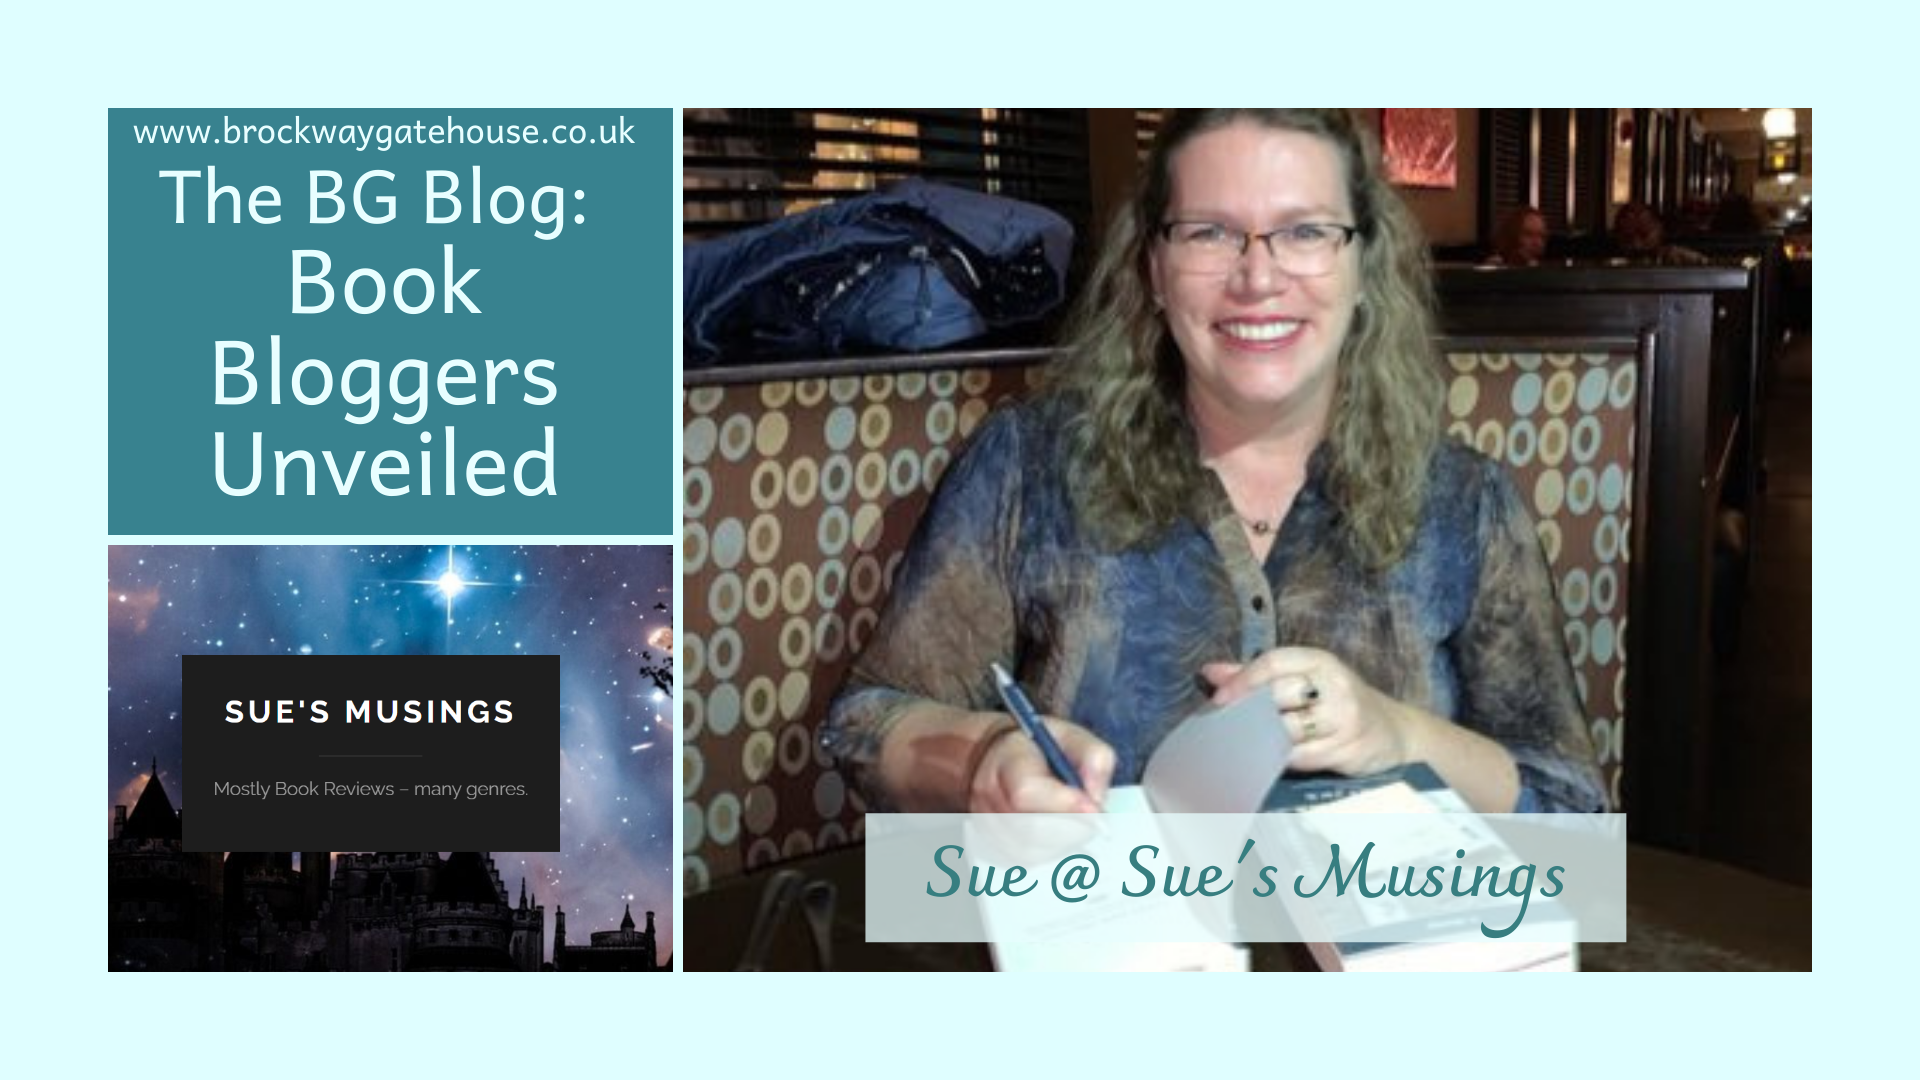 Book Bloggers Unveiled - Meet Sue @ Sue's Musings